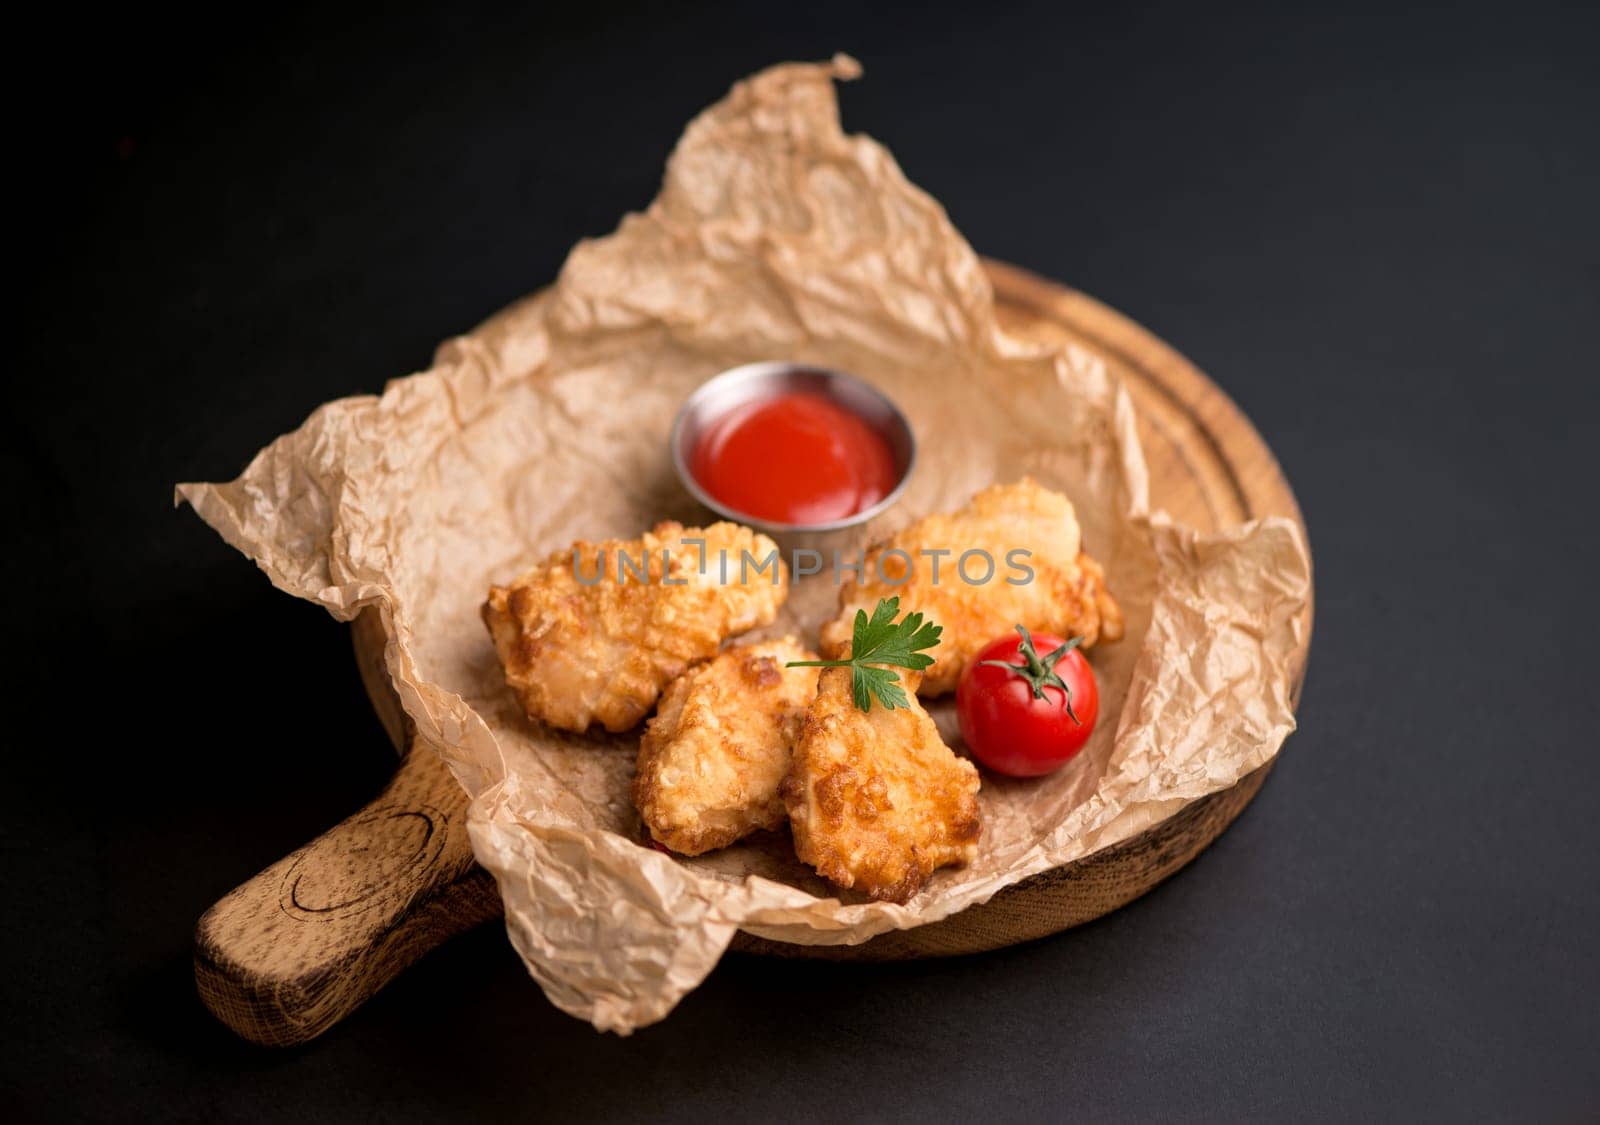 beer snacks - chicken fillet fried in batter with sauce on a wooden board on a black background by aprilphoto